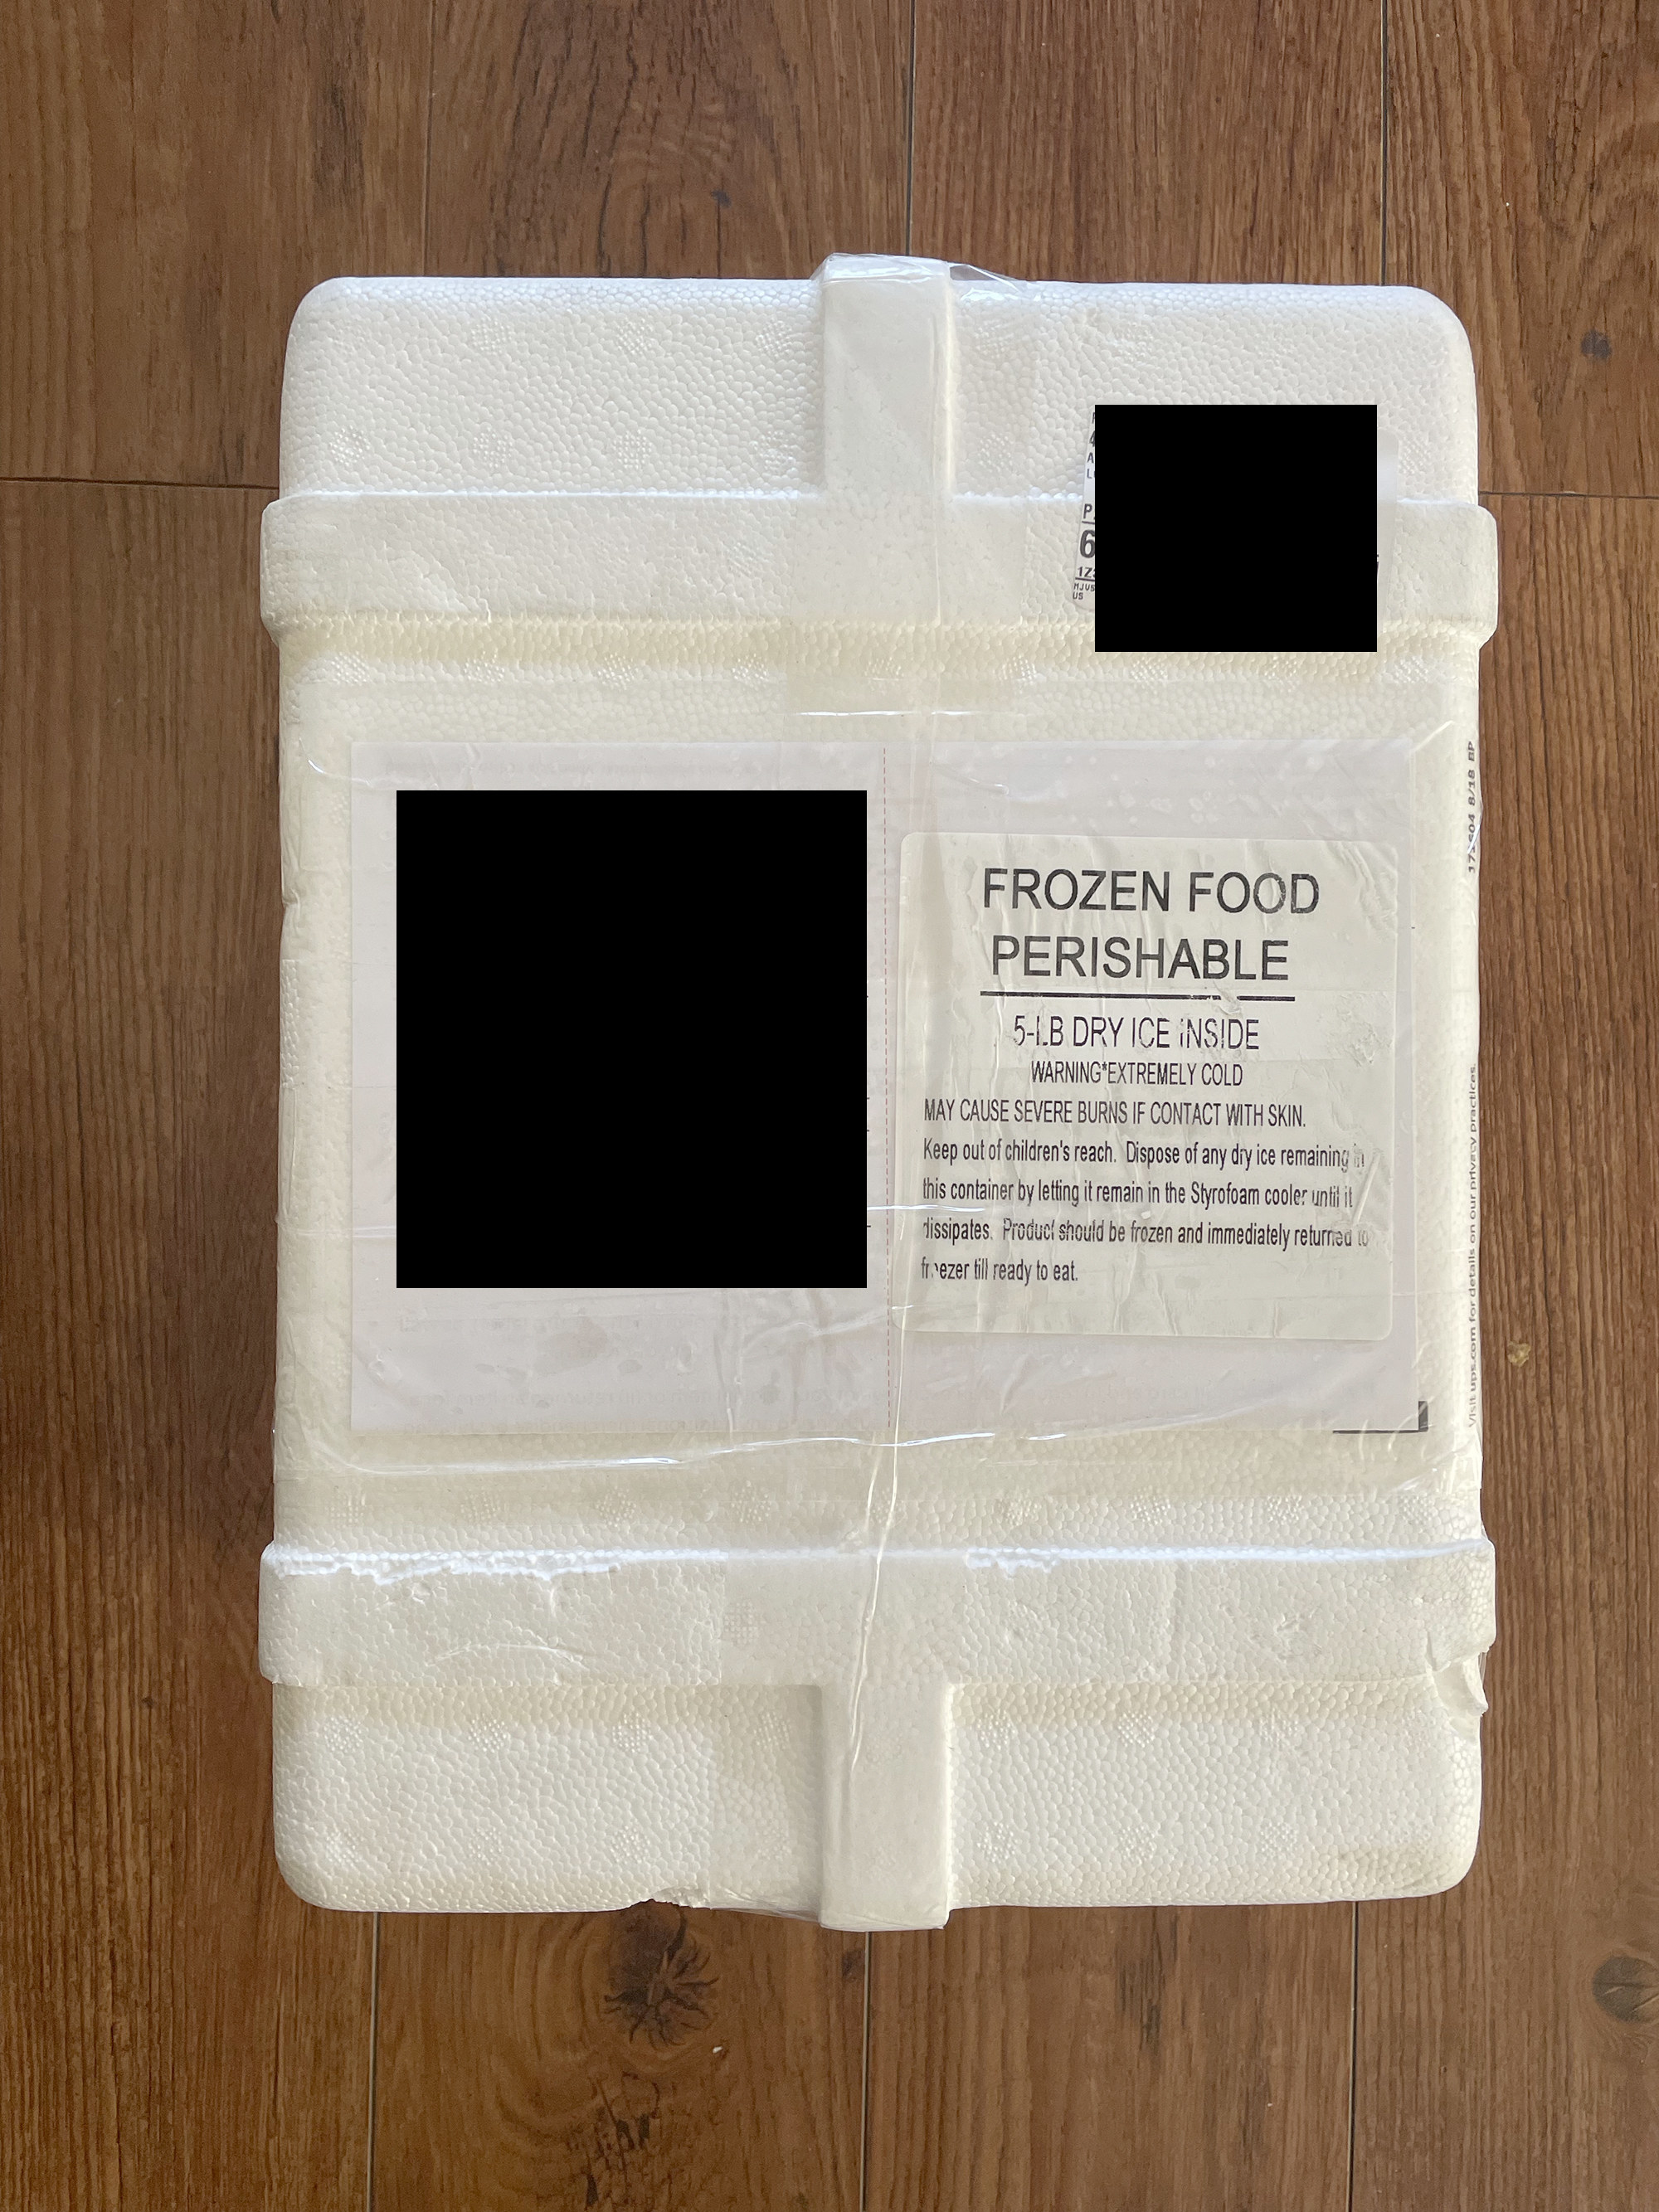 The package with the frozen food warning